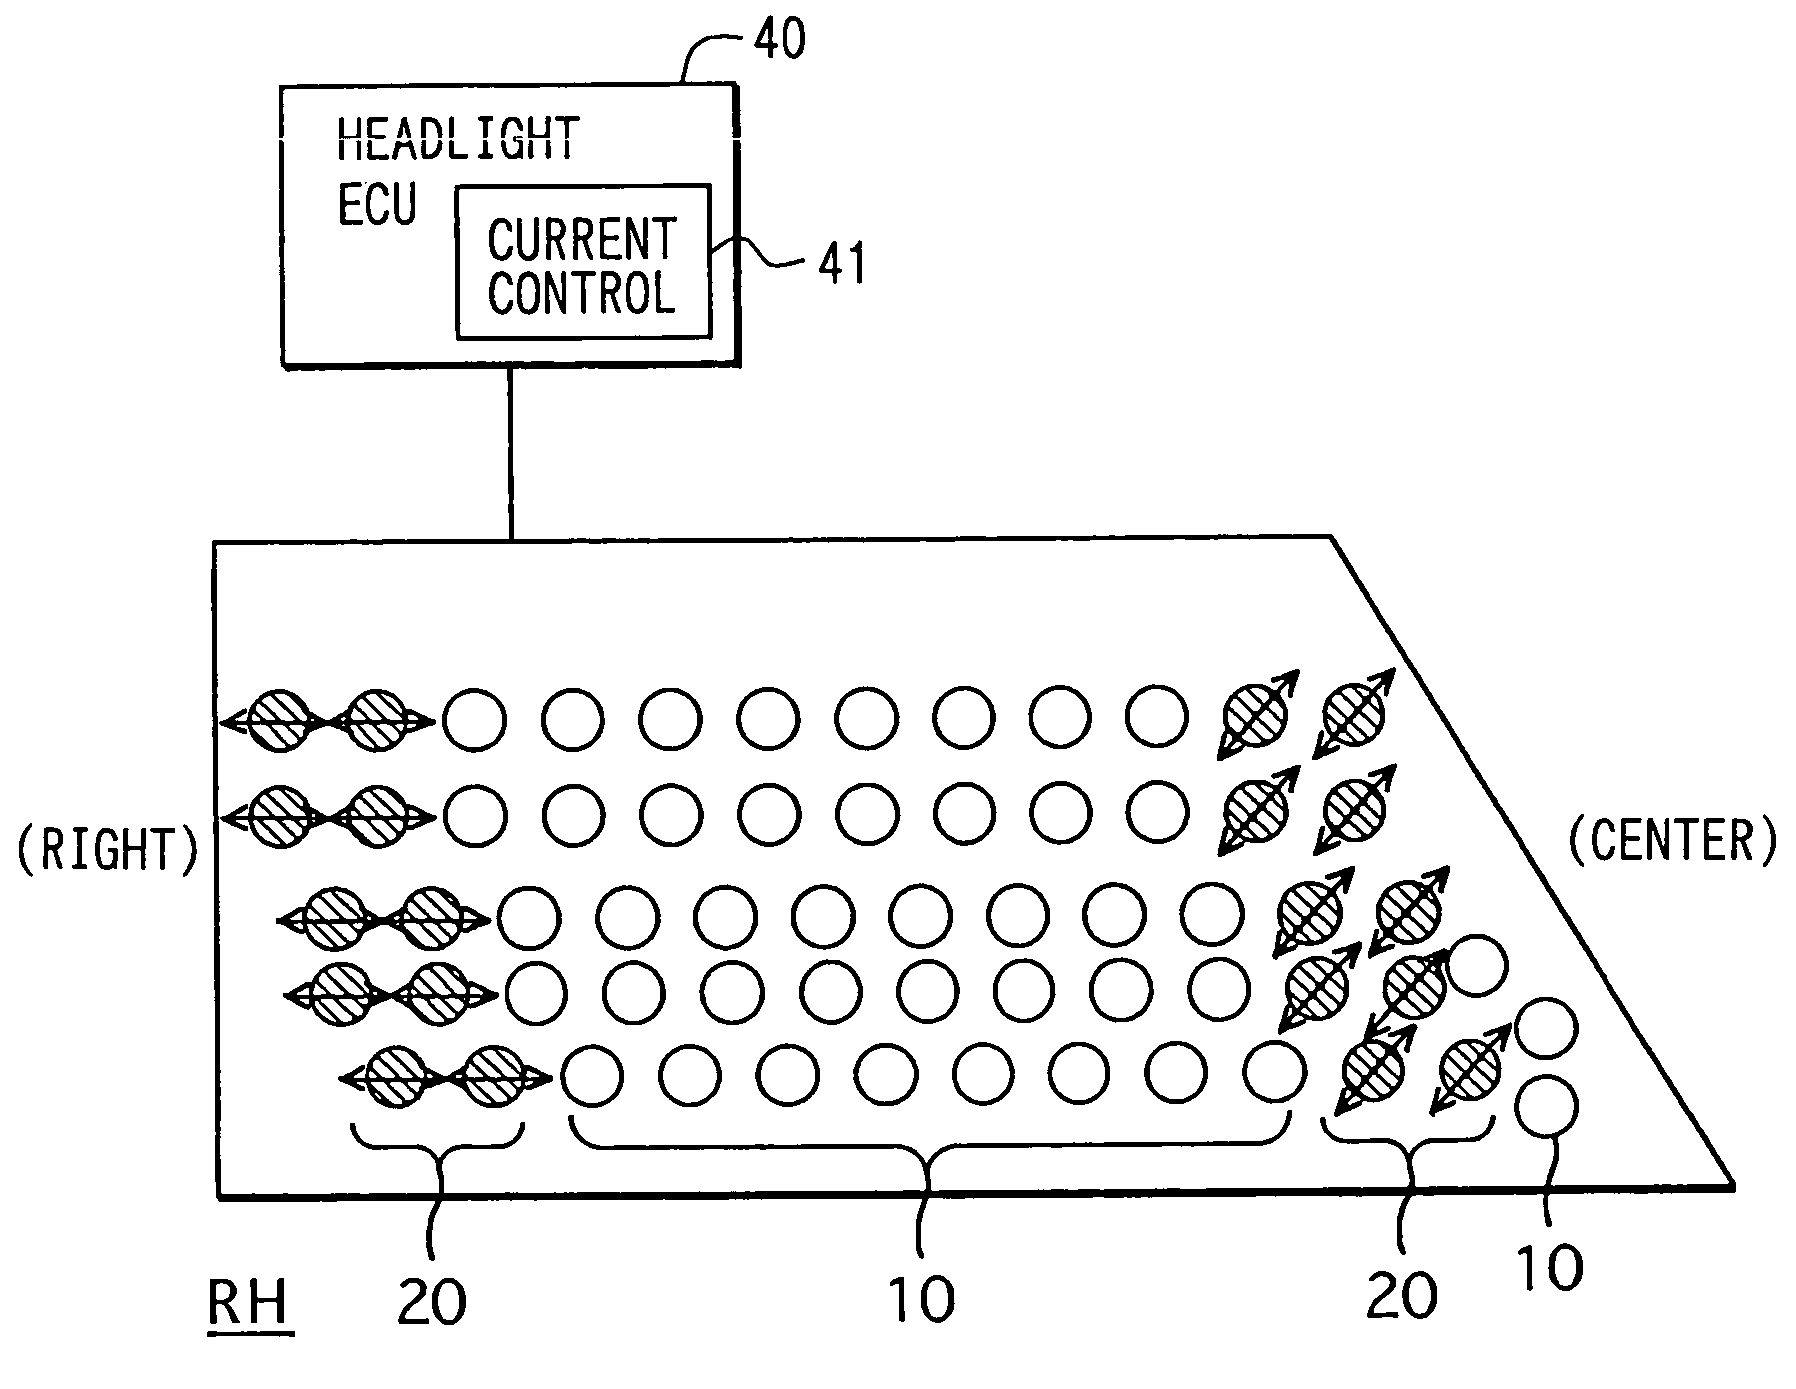 Lighting device for a vehicle and method for controlling light distribution of the lighting device